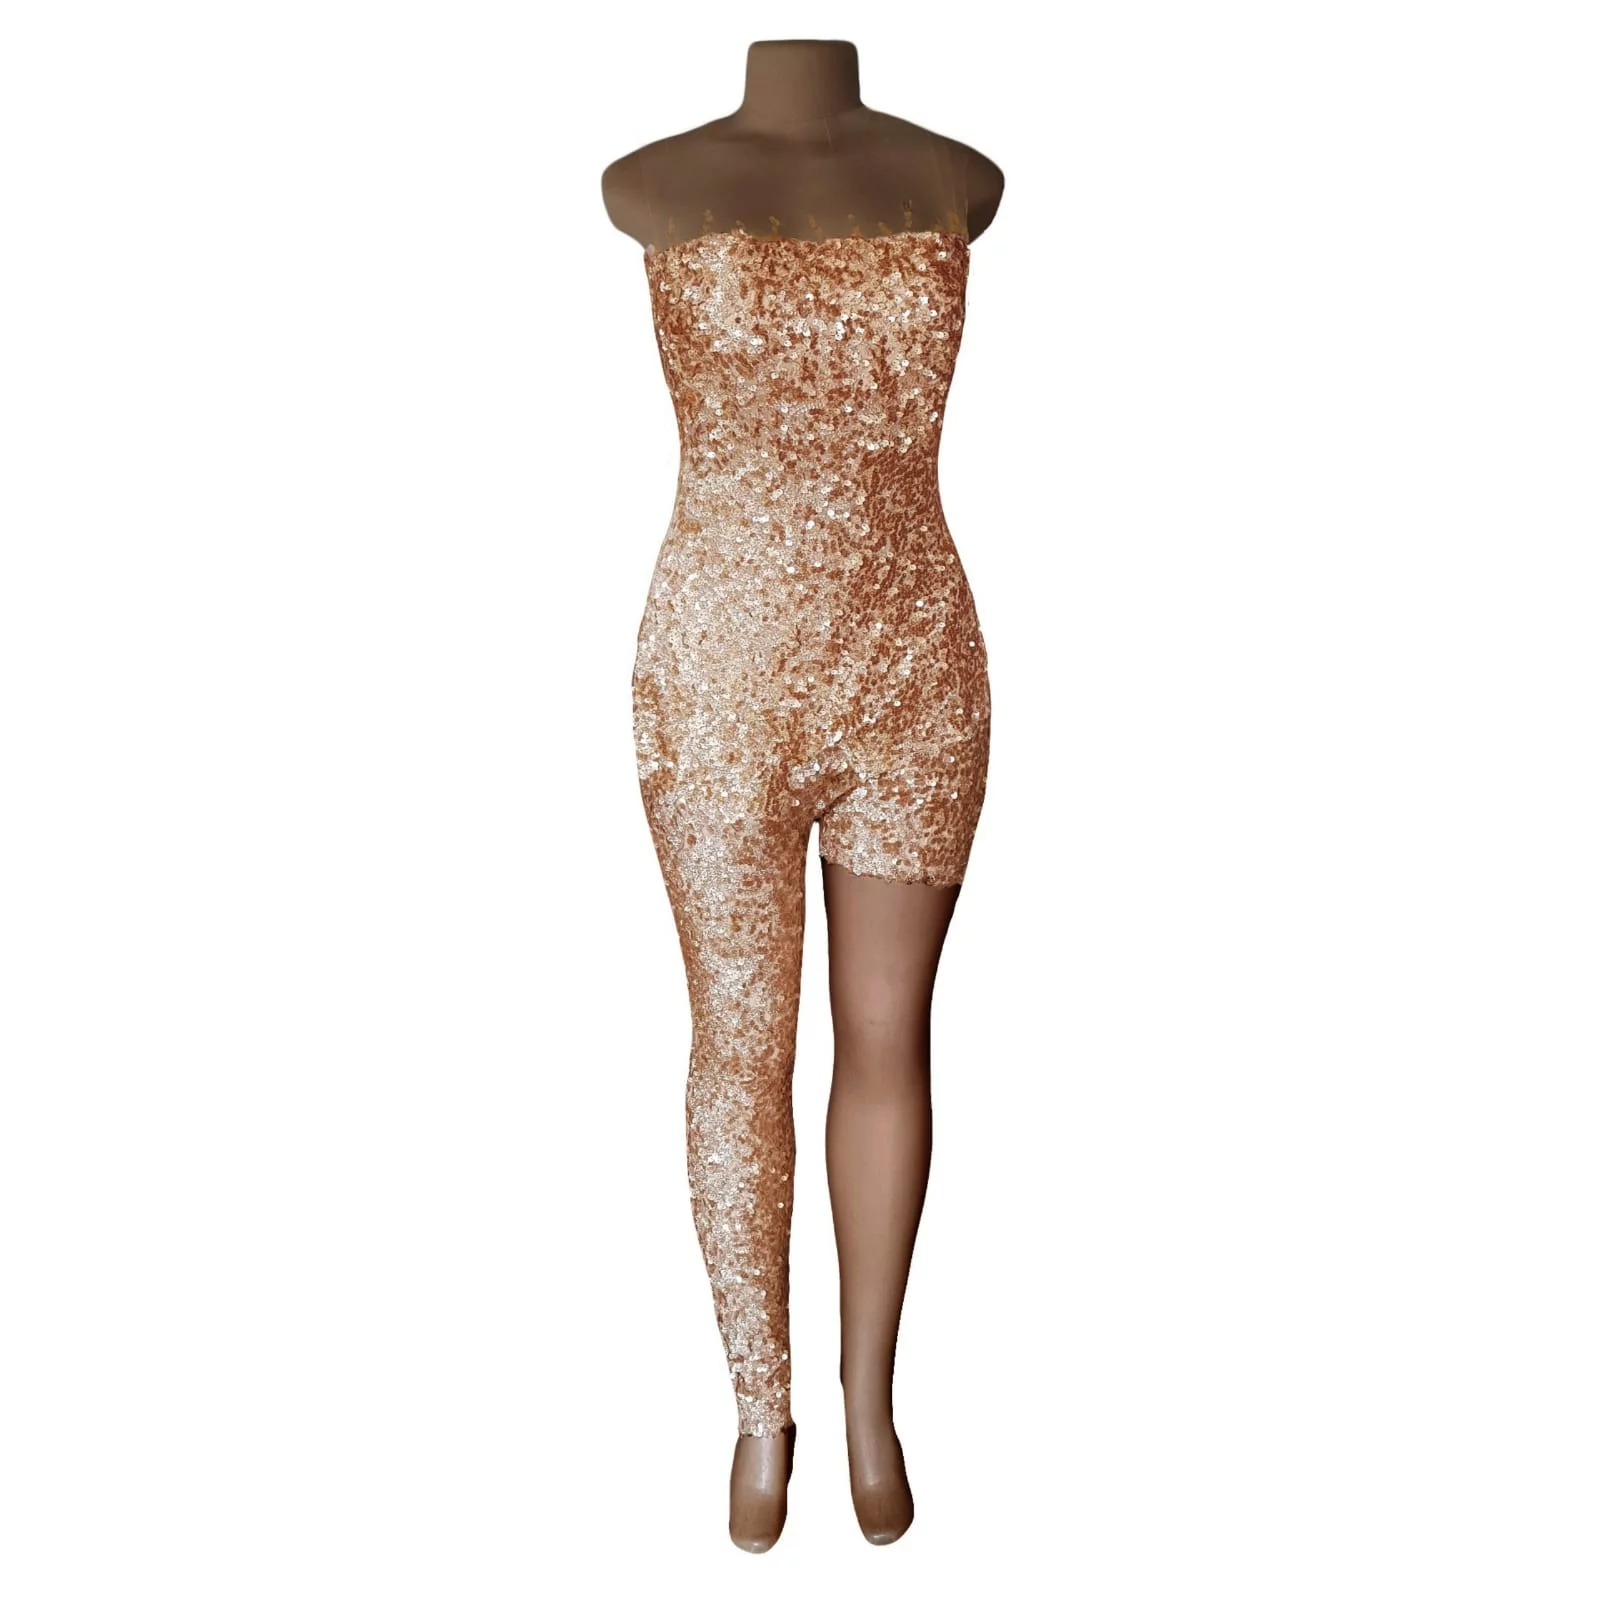 Gold sequins evening wear bodysuit 5 gold sequins evening wear bodysuit with an illusion neckline and sleeves, detailed with gold beads. With a long and short leg. Detachable side gold train.